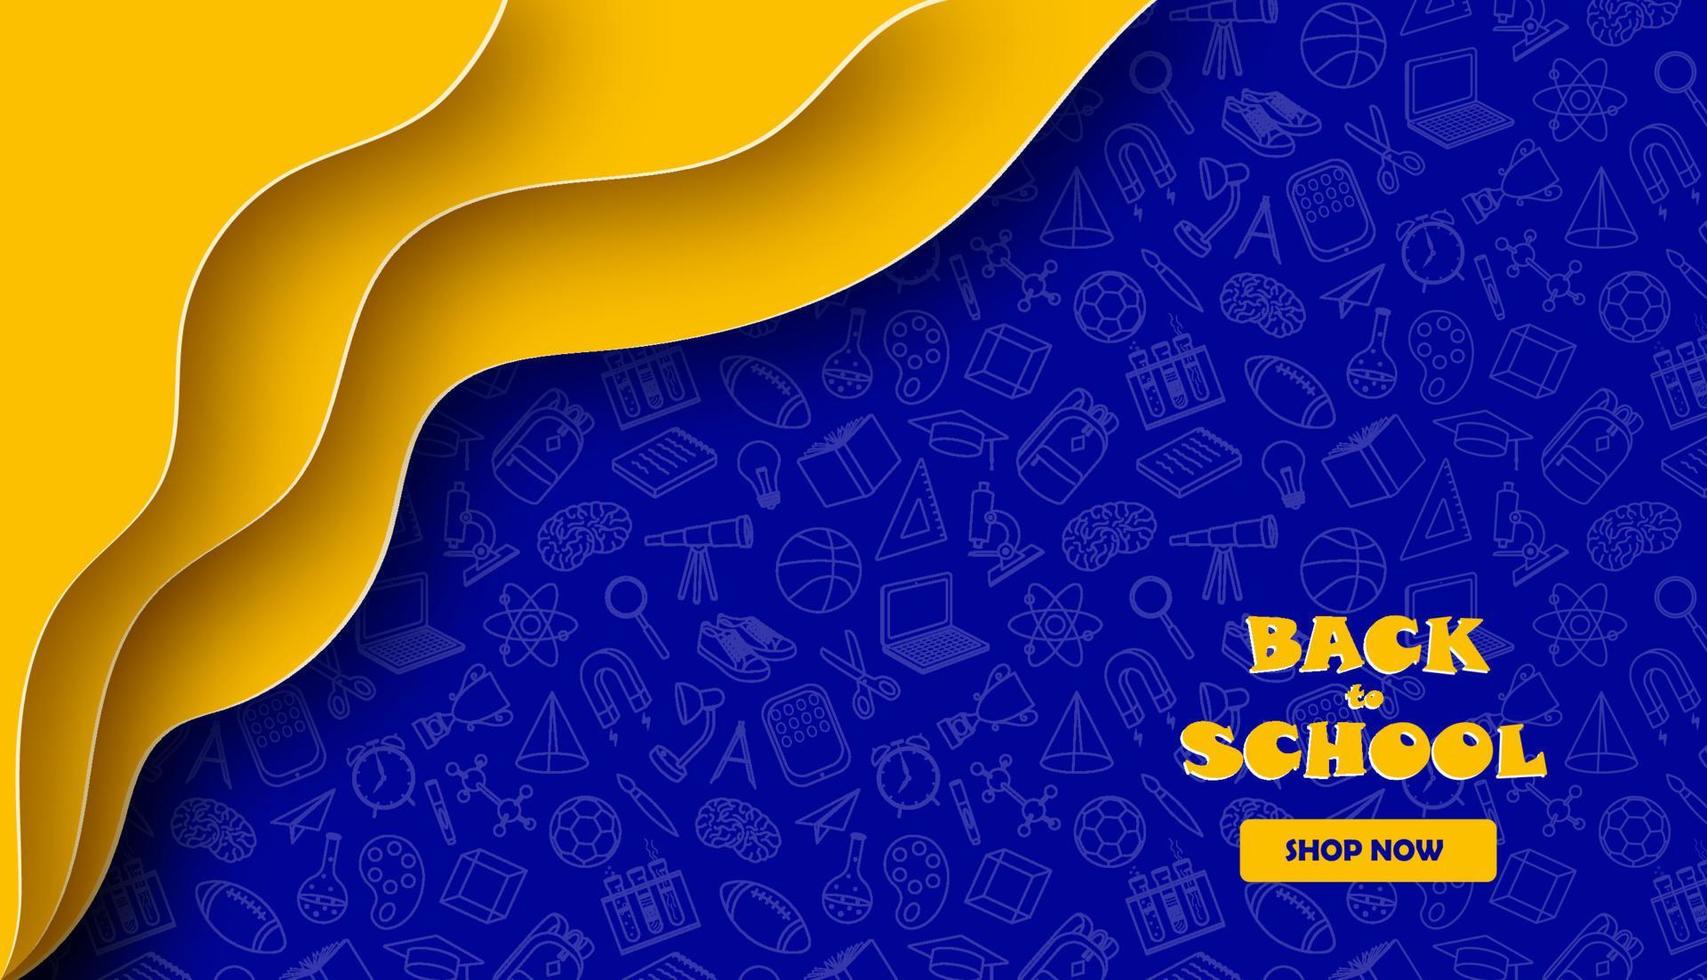 Back to school sale banner in paper cut style. vector